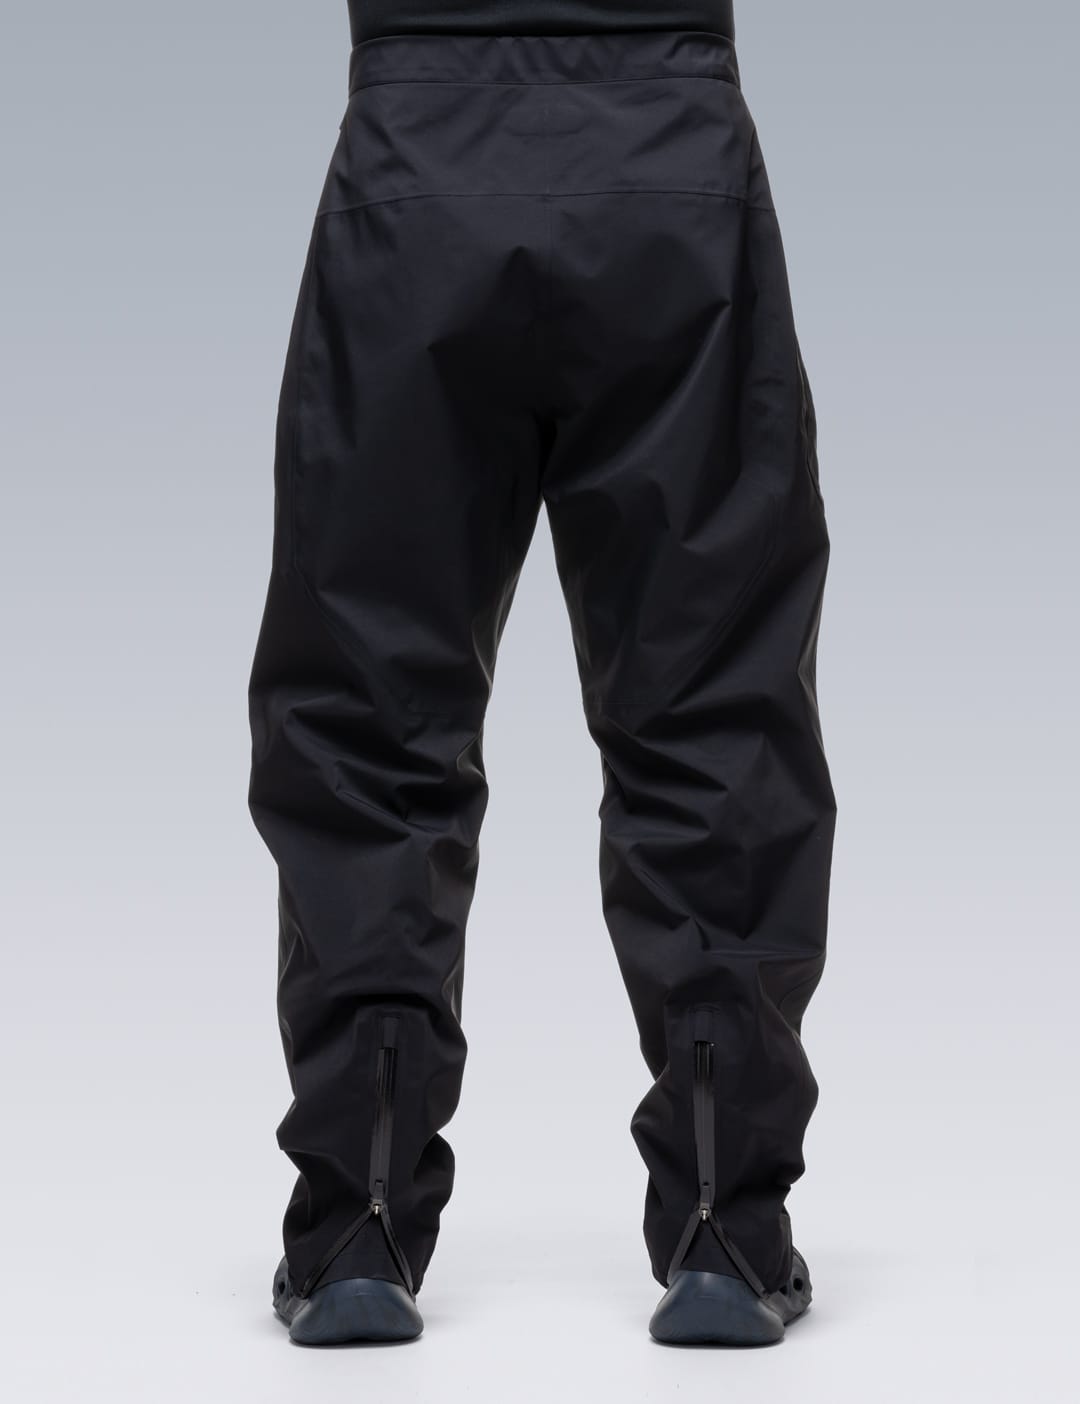 ACRONYM - 3L Gore-Tex Pro Pants | HBX - Globally Curated Fashion